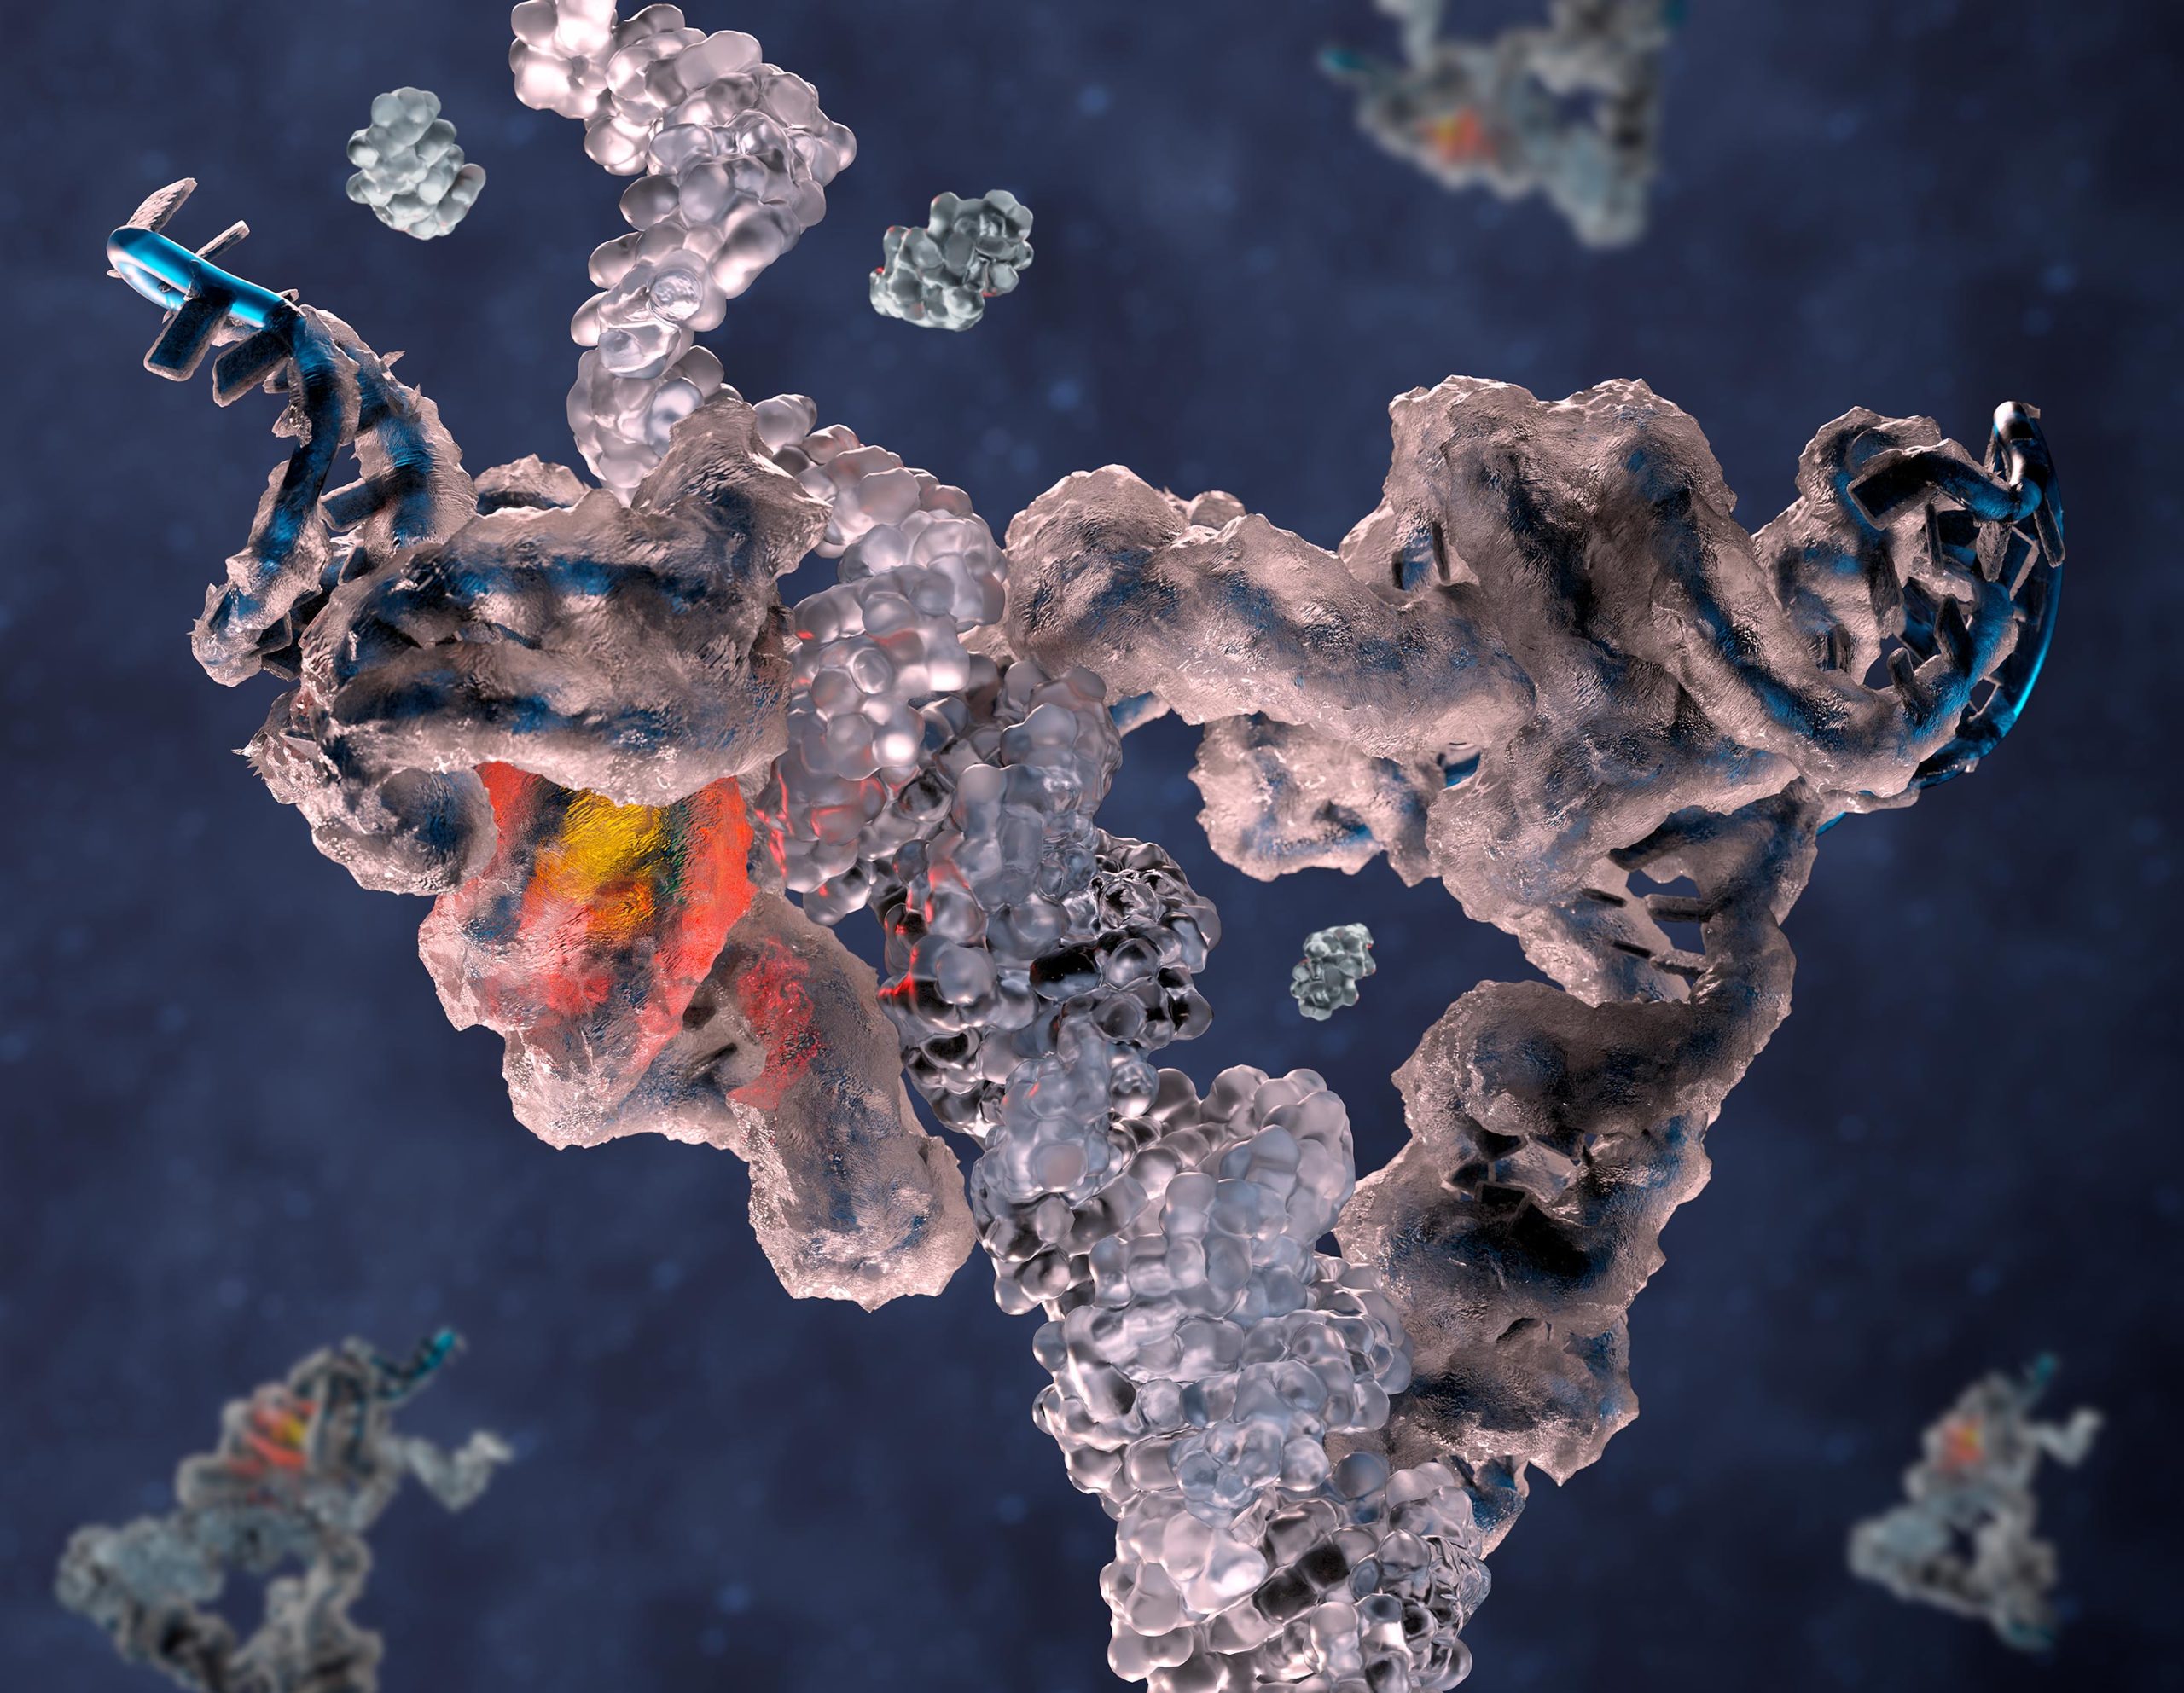 Chilling Discovery: Cryo-EM Uncovers Ancient Molecular Machine of Life